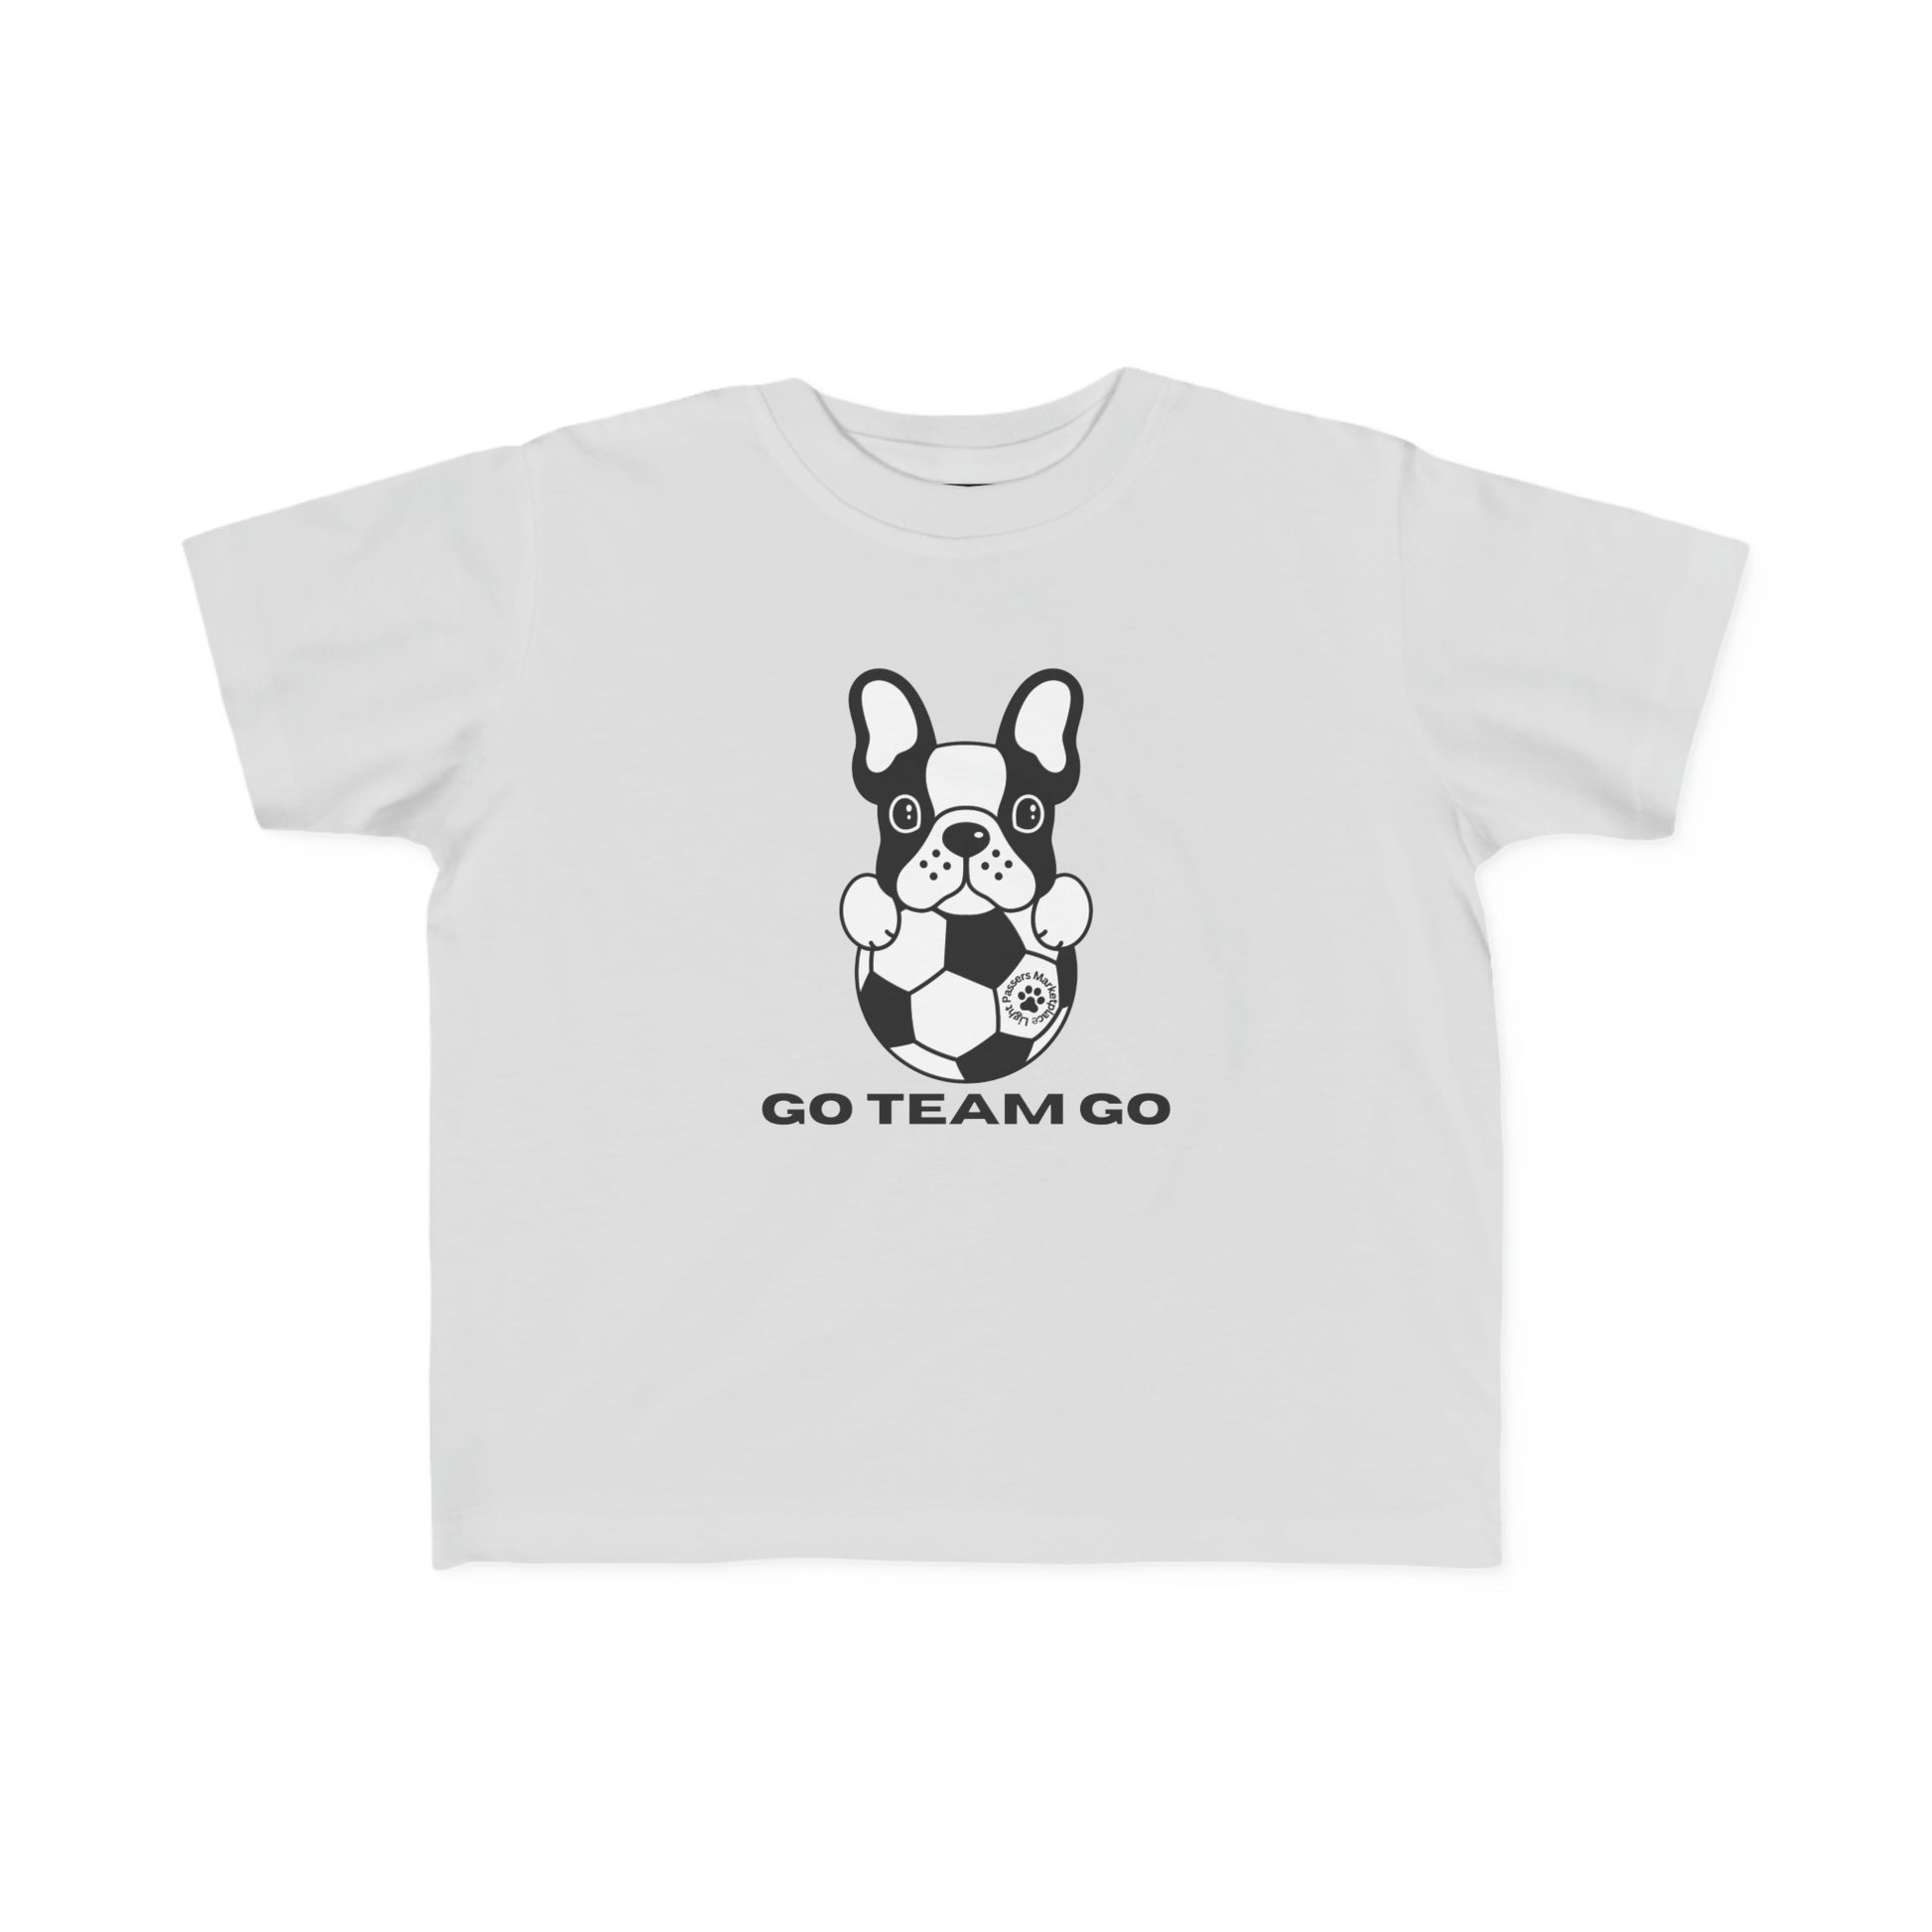 A toddler's white tee featuring a dog playing soccer, emphasizing softness and durability. Made of 100% combed cotton, light fabric, and a tear-away label for comfort.